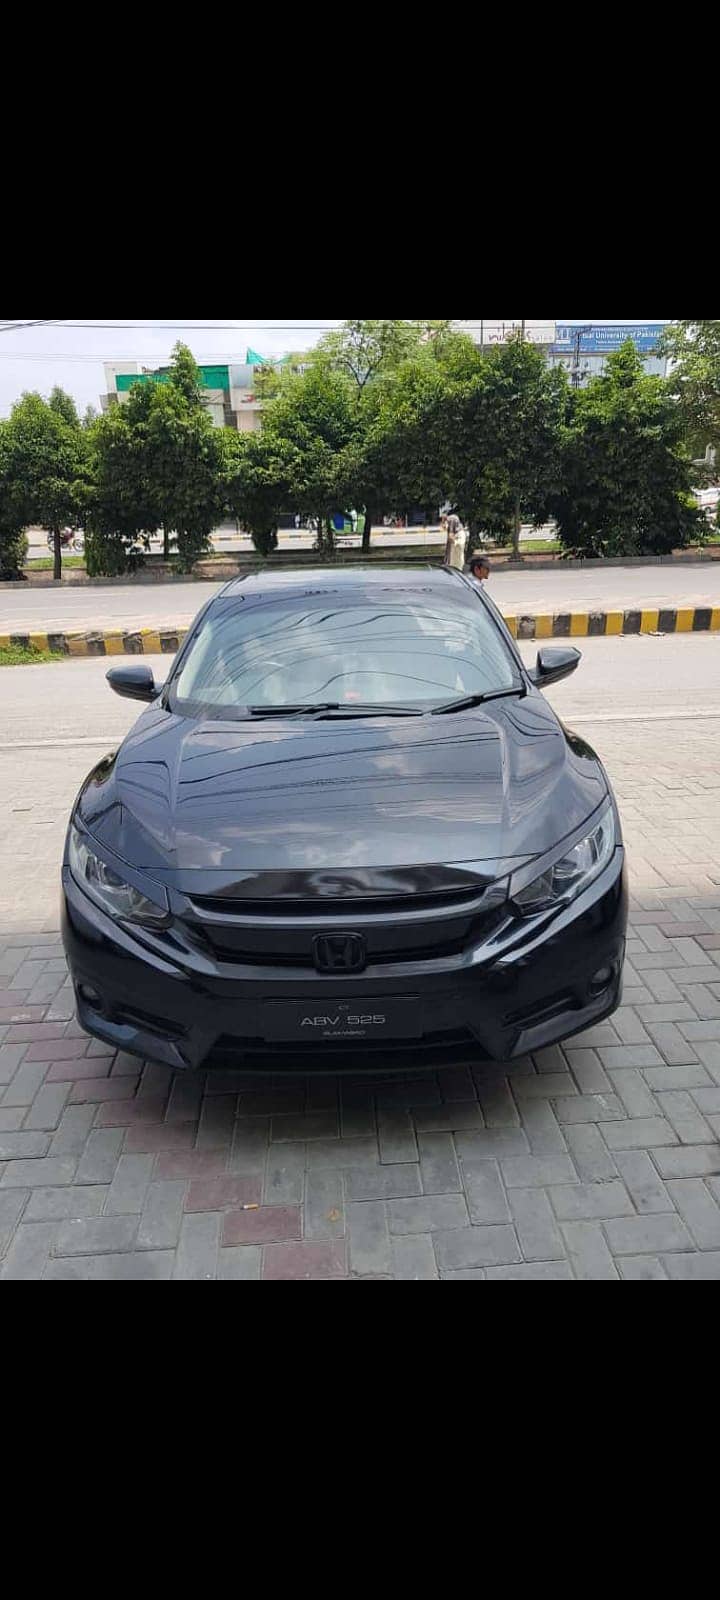 RENT A CAR | CAR RENTAL | Rent a car Services in lahore to all Pak 11